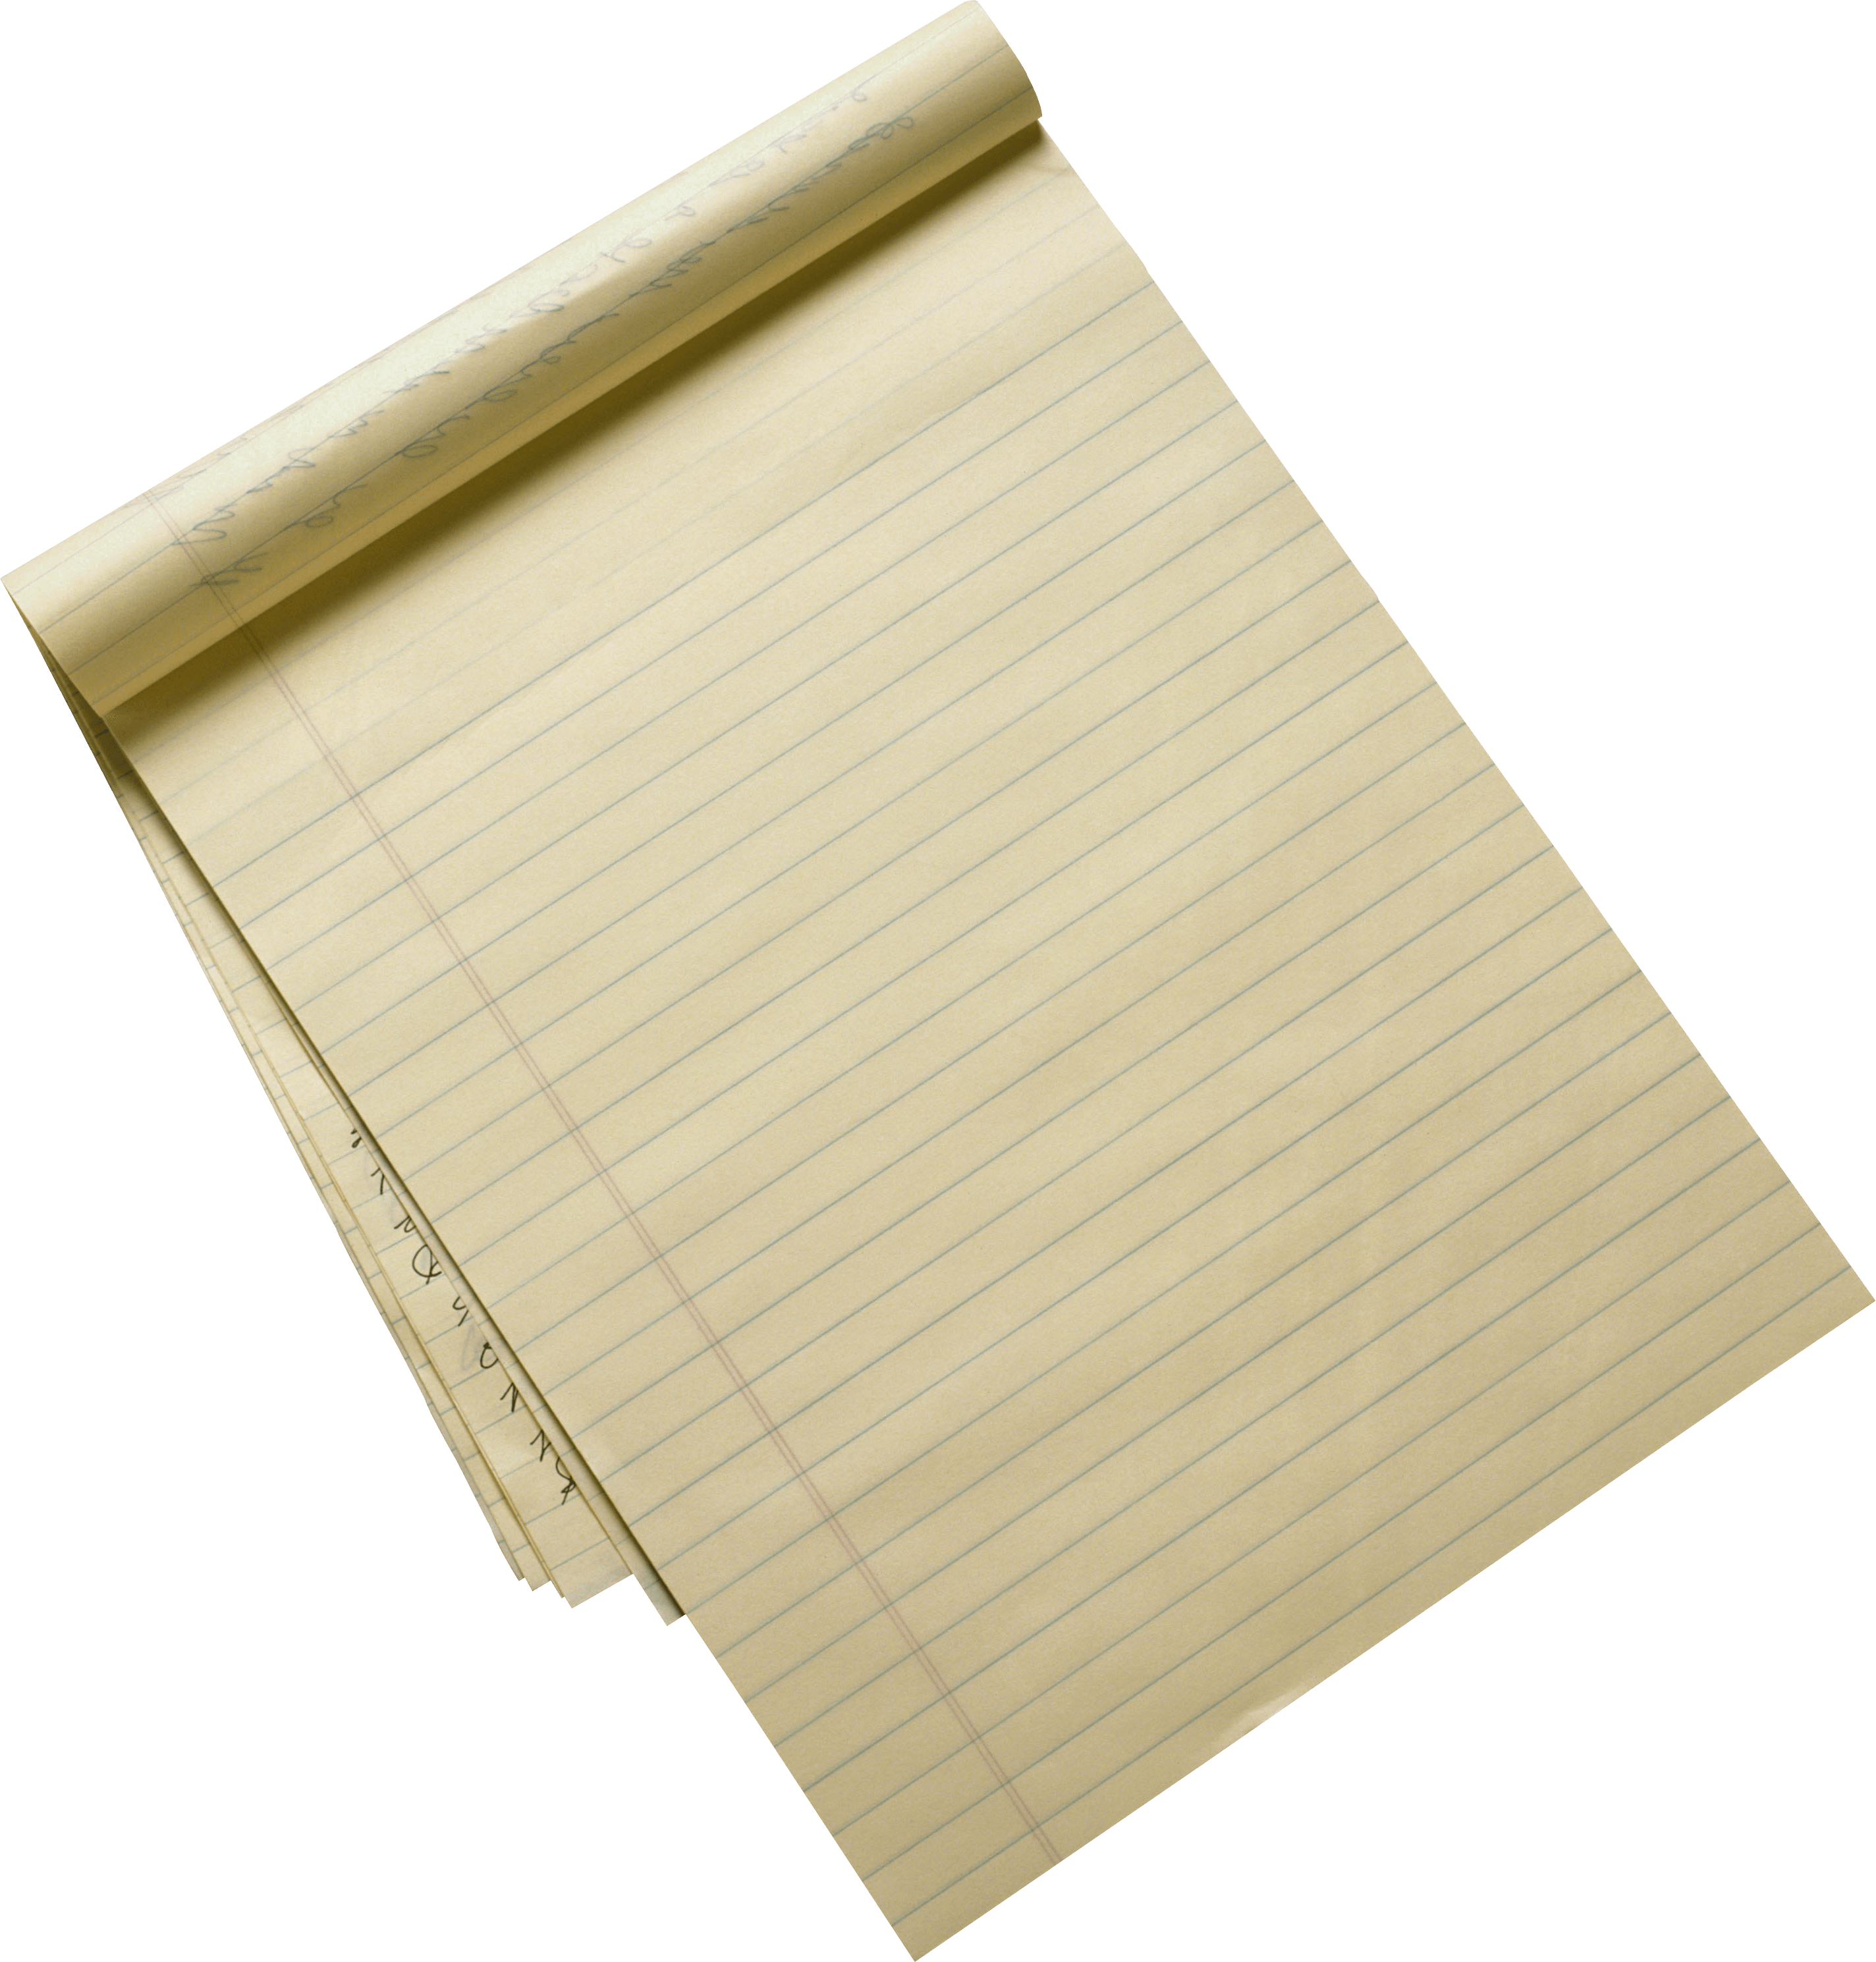 Recycled Lined Paper Sheet transparent PNG - StickPNG